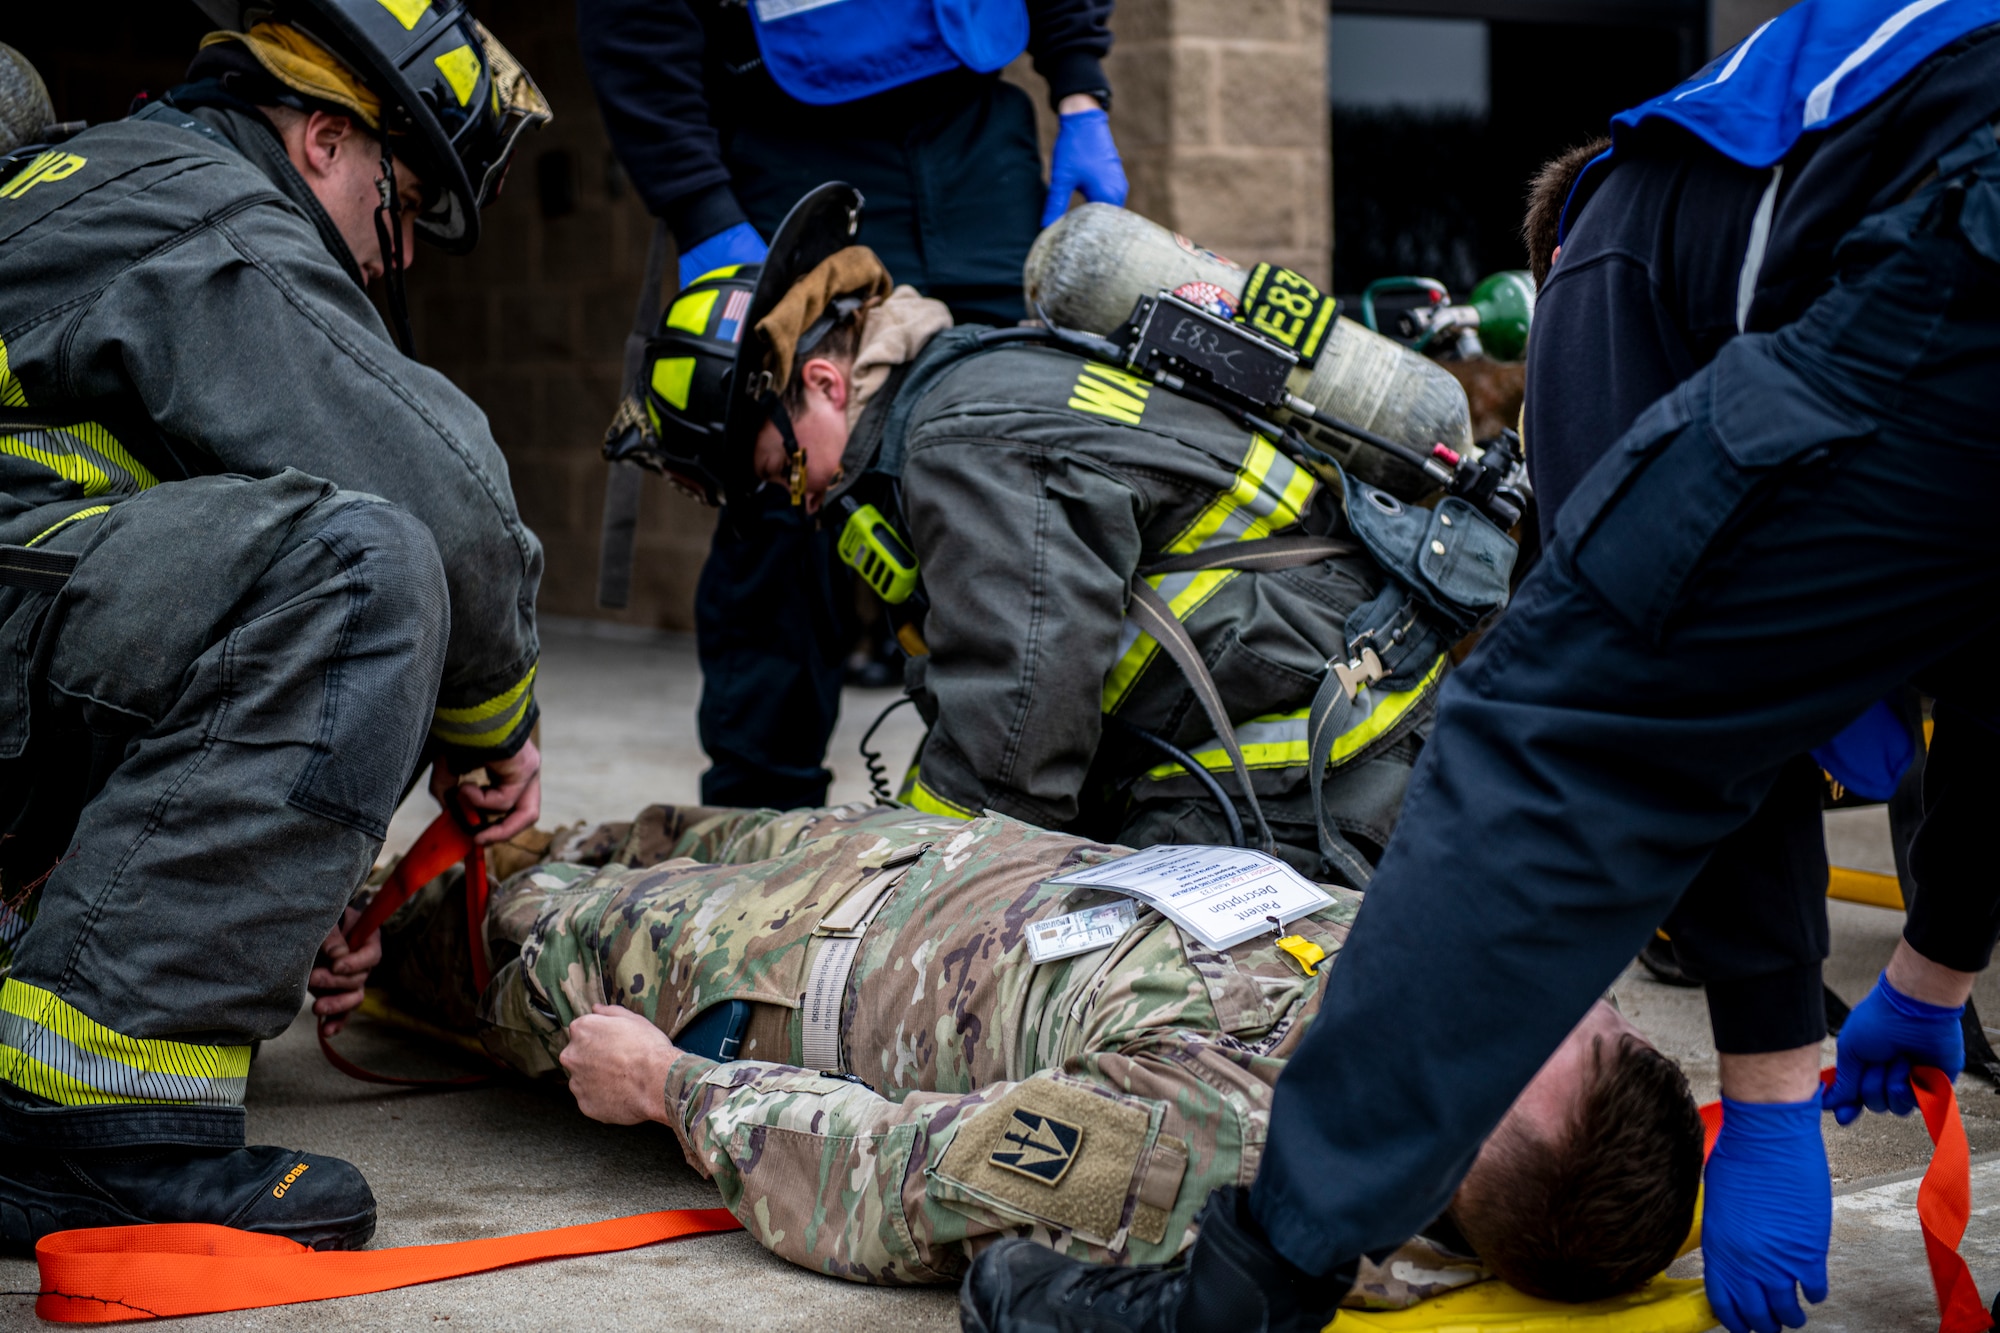 The Indiana National Guard hosted Operation Down and Dirty, a joint-force emergency  training exercise, at Stout Field, Ind., Jan. 14, 2020. The exercise involved representatives from several local agencies including the Indianapolis Metropolitan Police Department, Indiana State Police, Wayne Township Fire/Emergency Medical Services,  (Photo by Tech. Sgt. Roland Sturm)